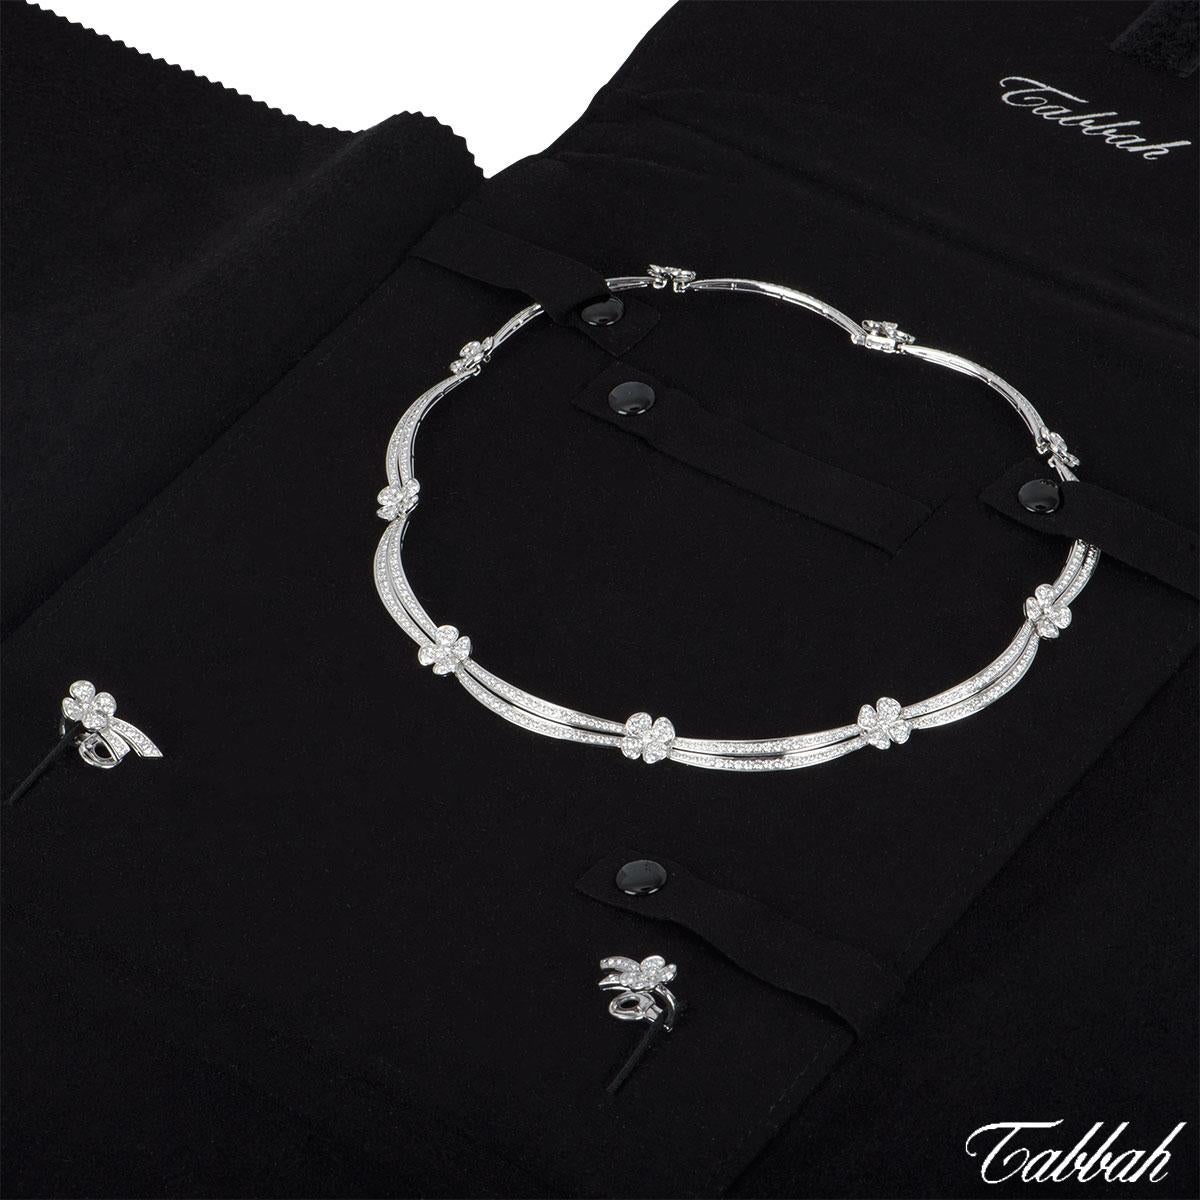 Women's Tabbah Diamond Jewellery Necklace and Earrings Suite 11.51 total carats